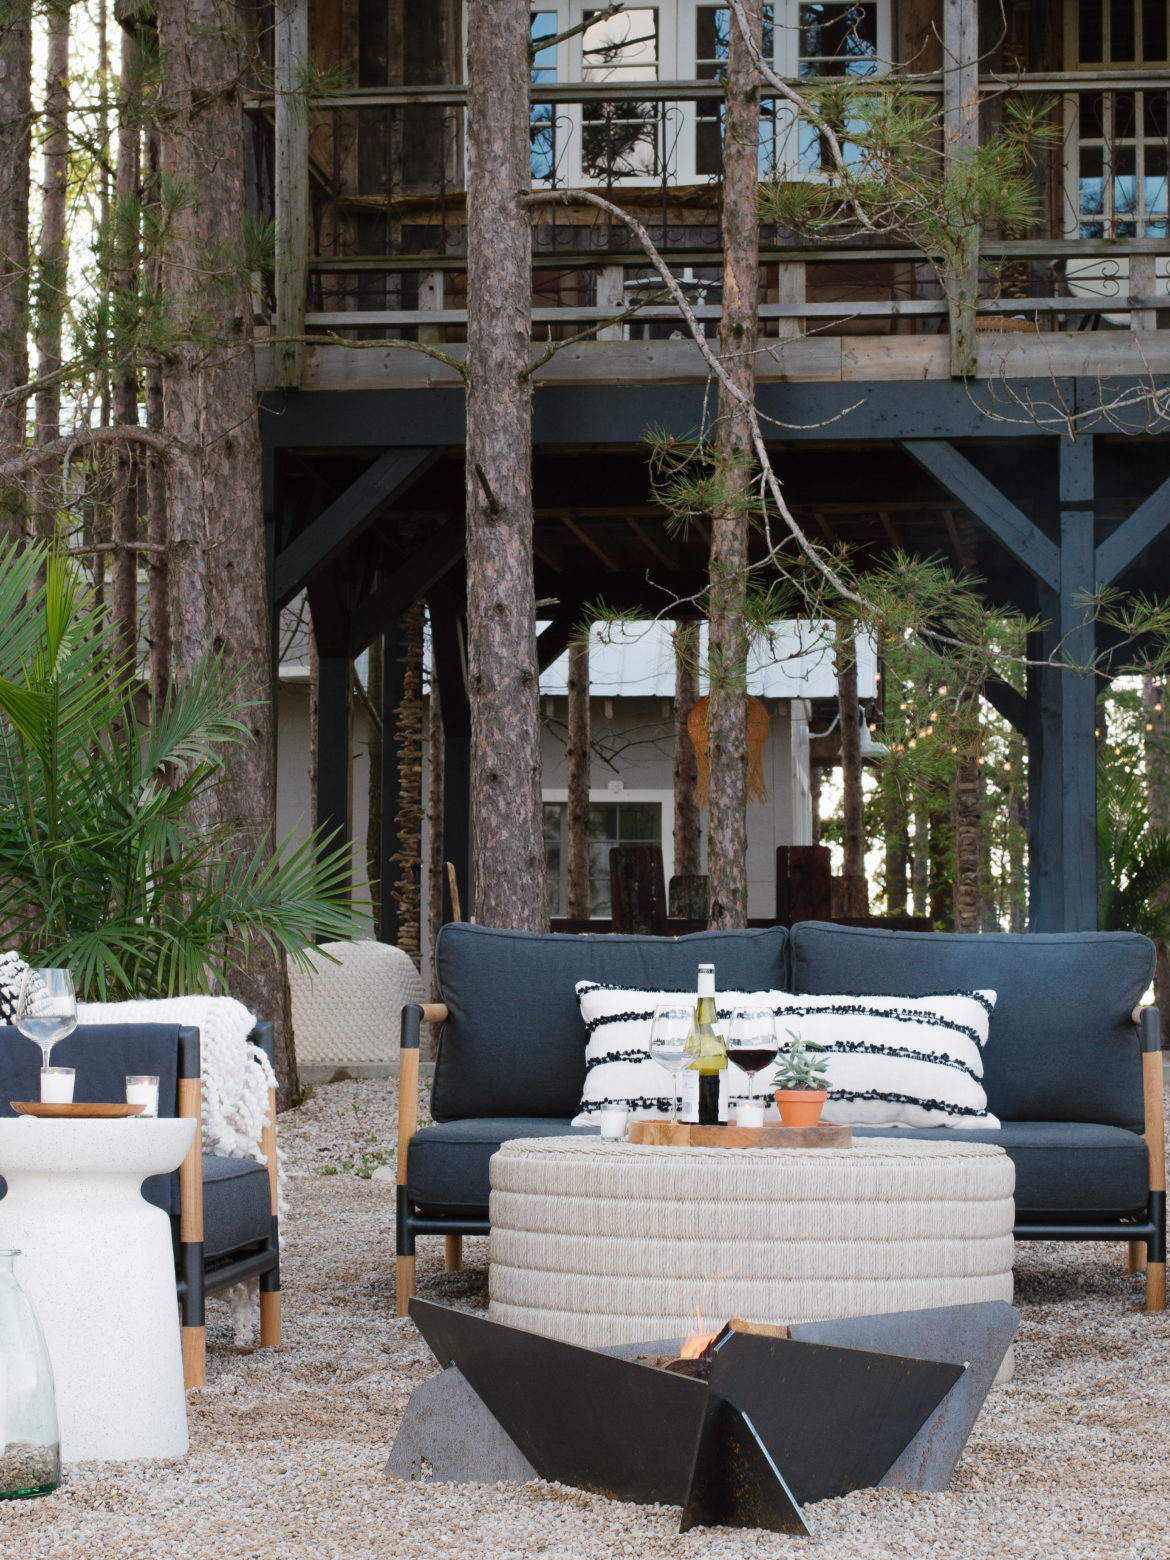 OUTDOORS IS IN: Create your own cozy backyard escape with these tips| www.lynneknowlton.com